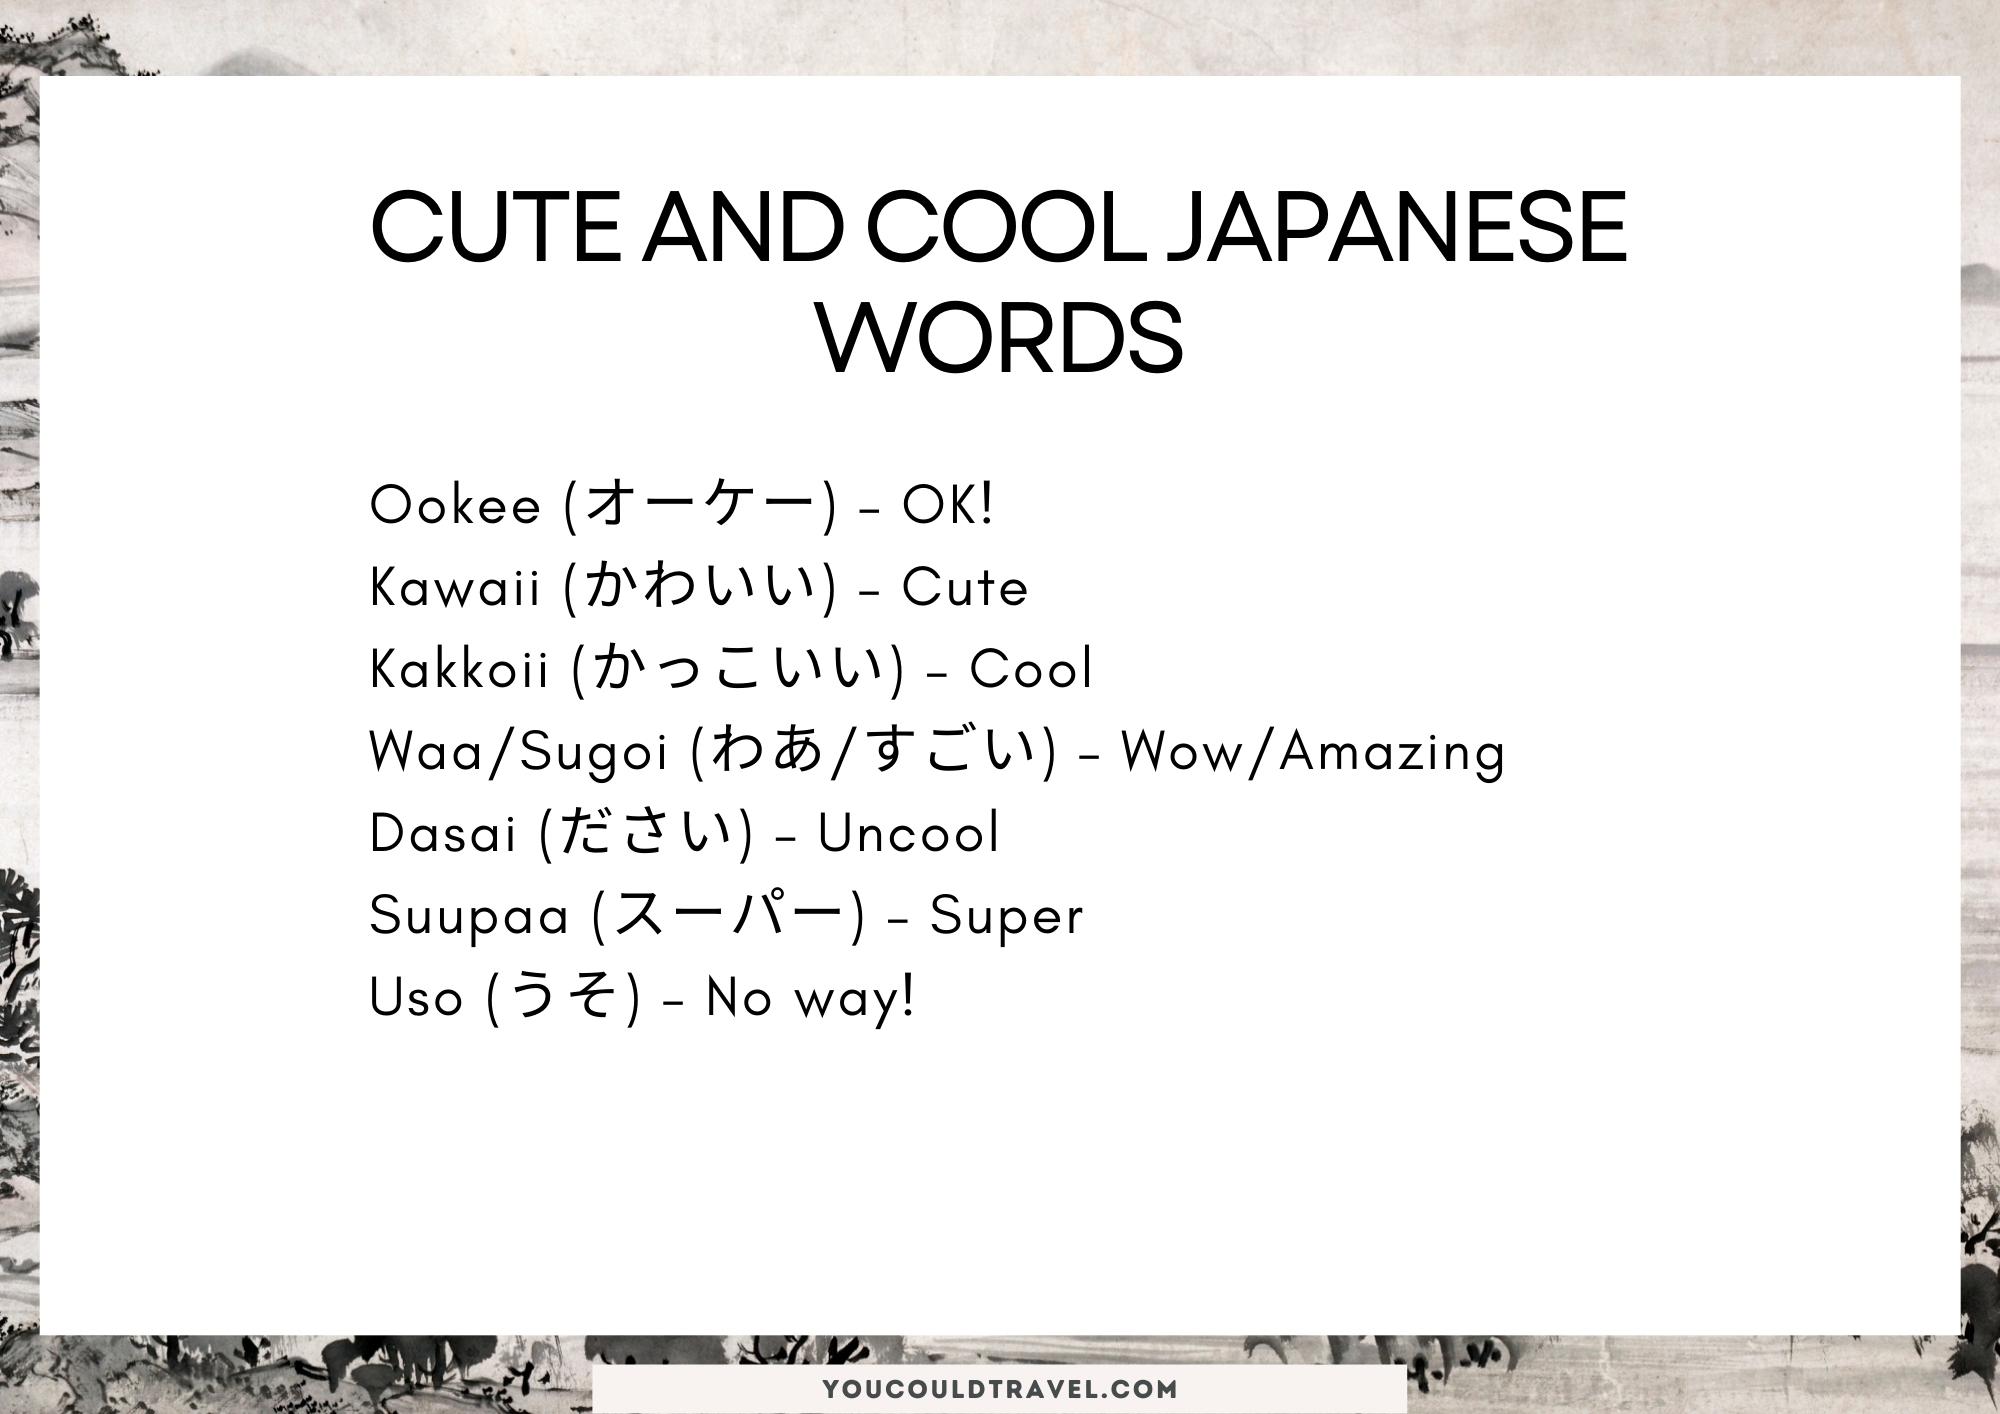 Cute and cool Japanese slang words